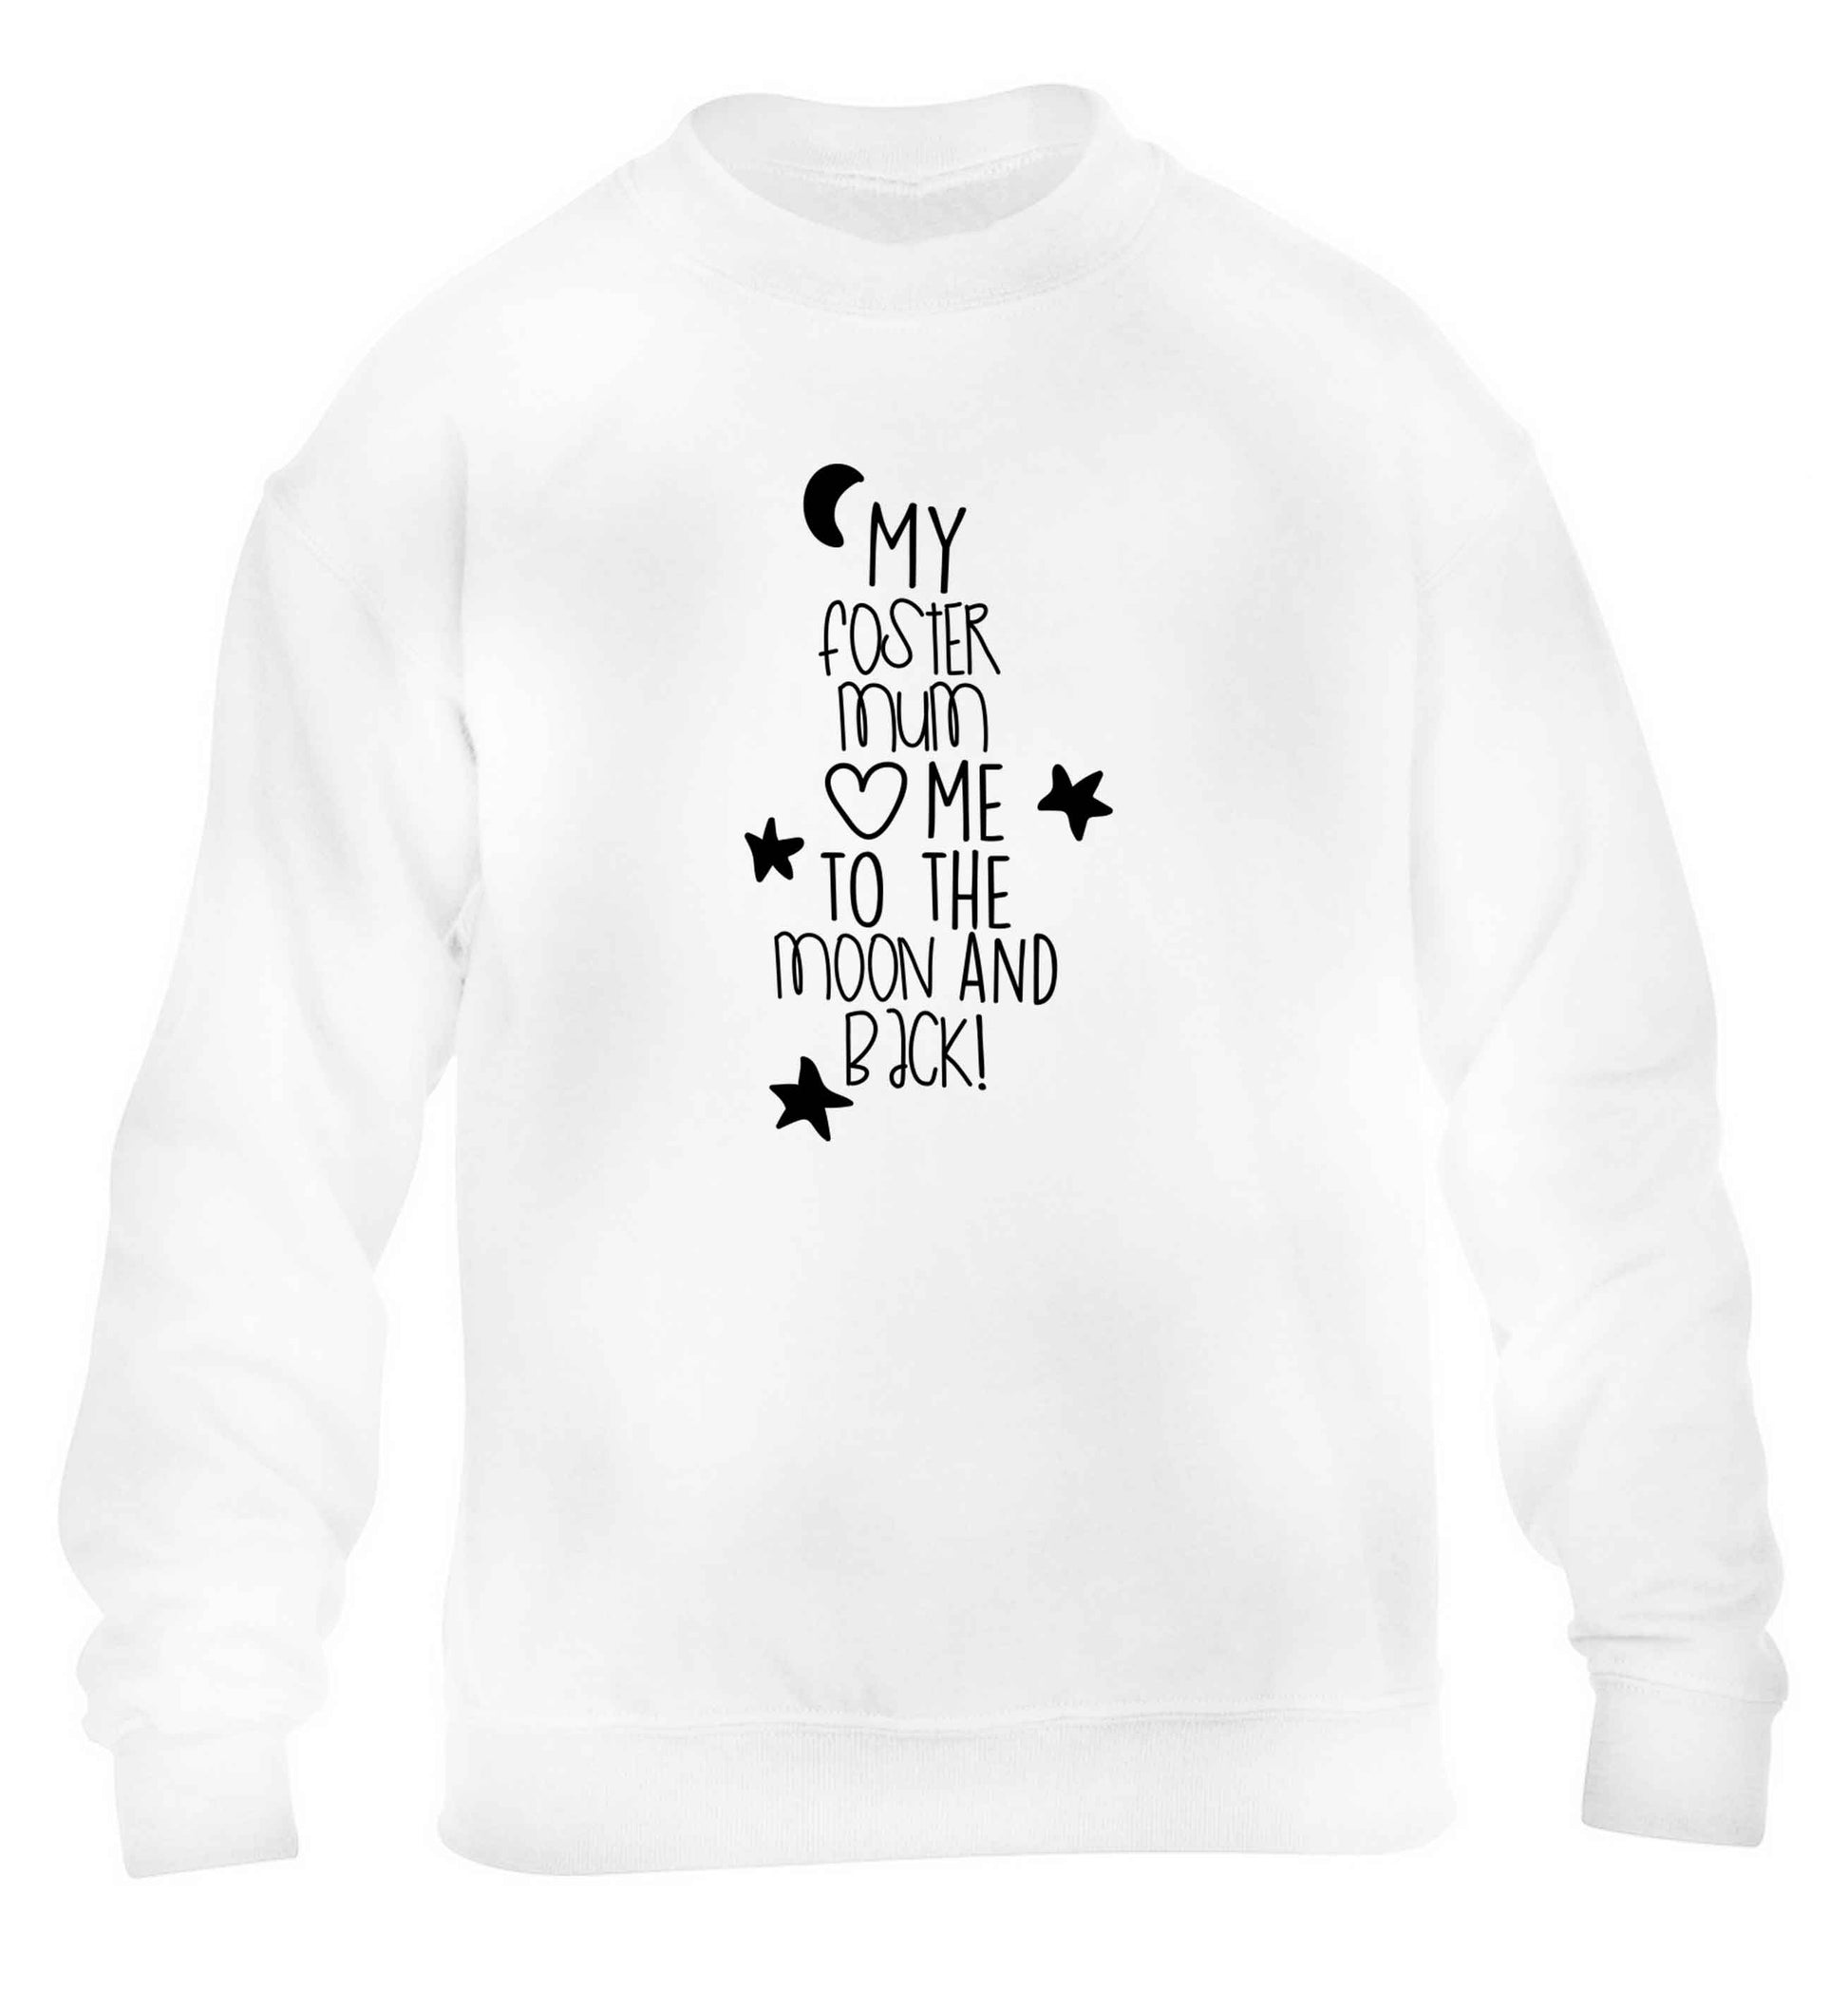 My foster mum loves me to the moon and back children's white sweater 12-13 Years